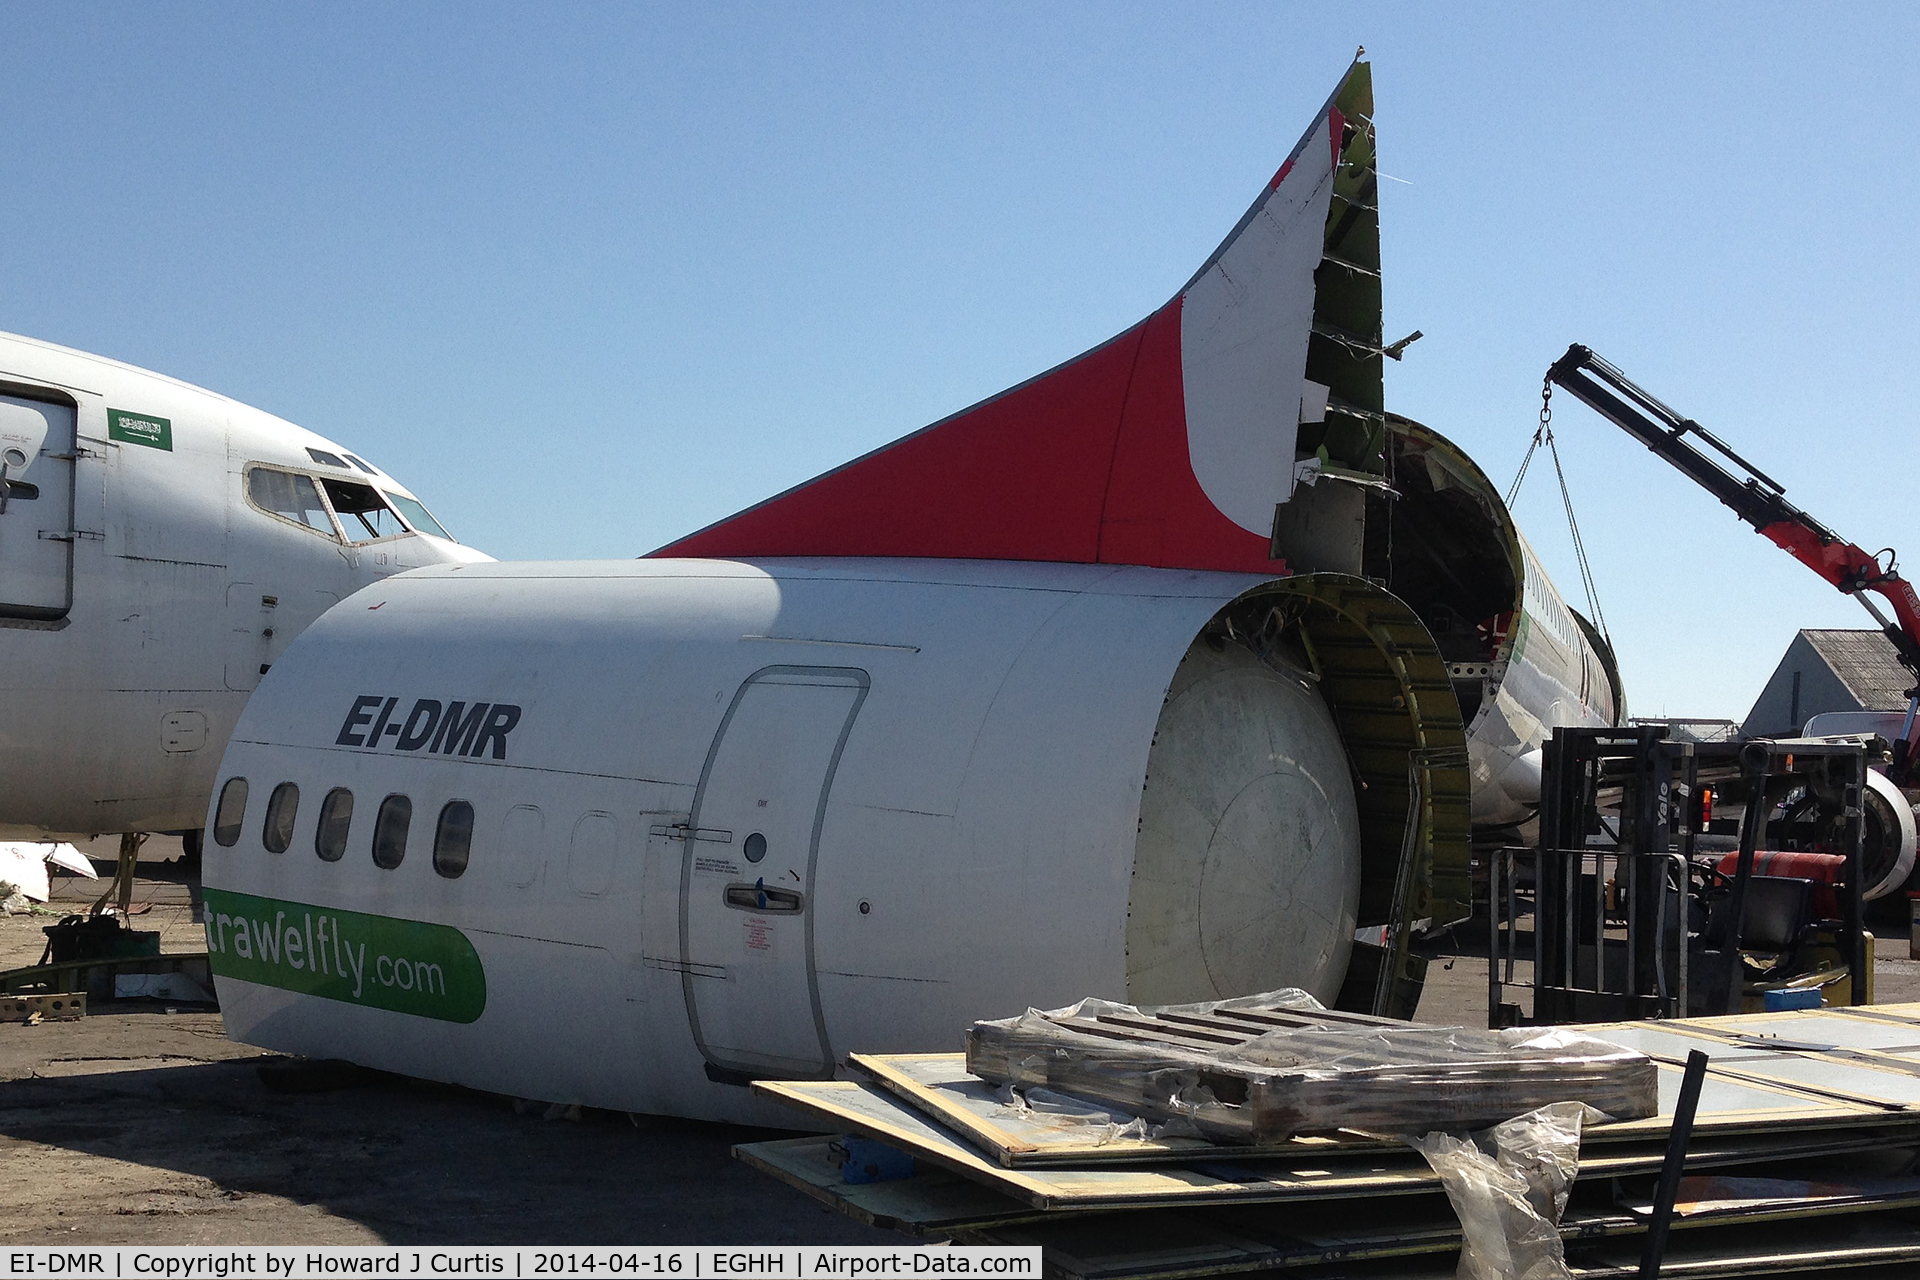 EI-DMR, 1992 Boeing 737-436 C/N 25851, Tail removed during scrapping.